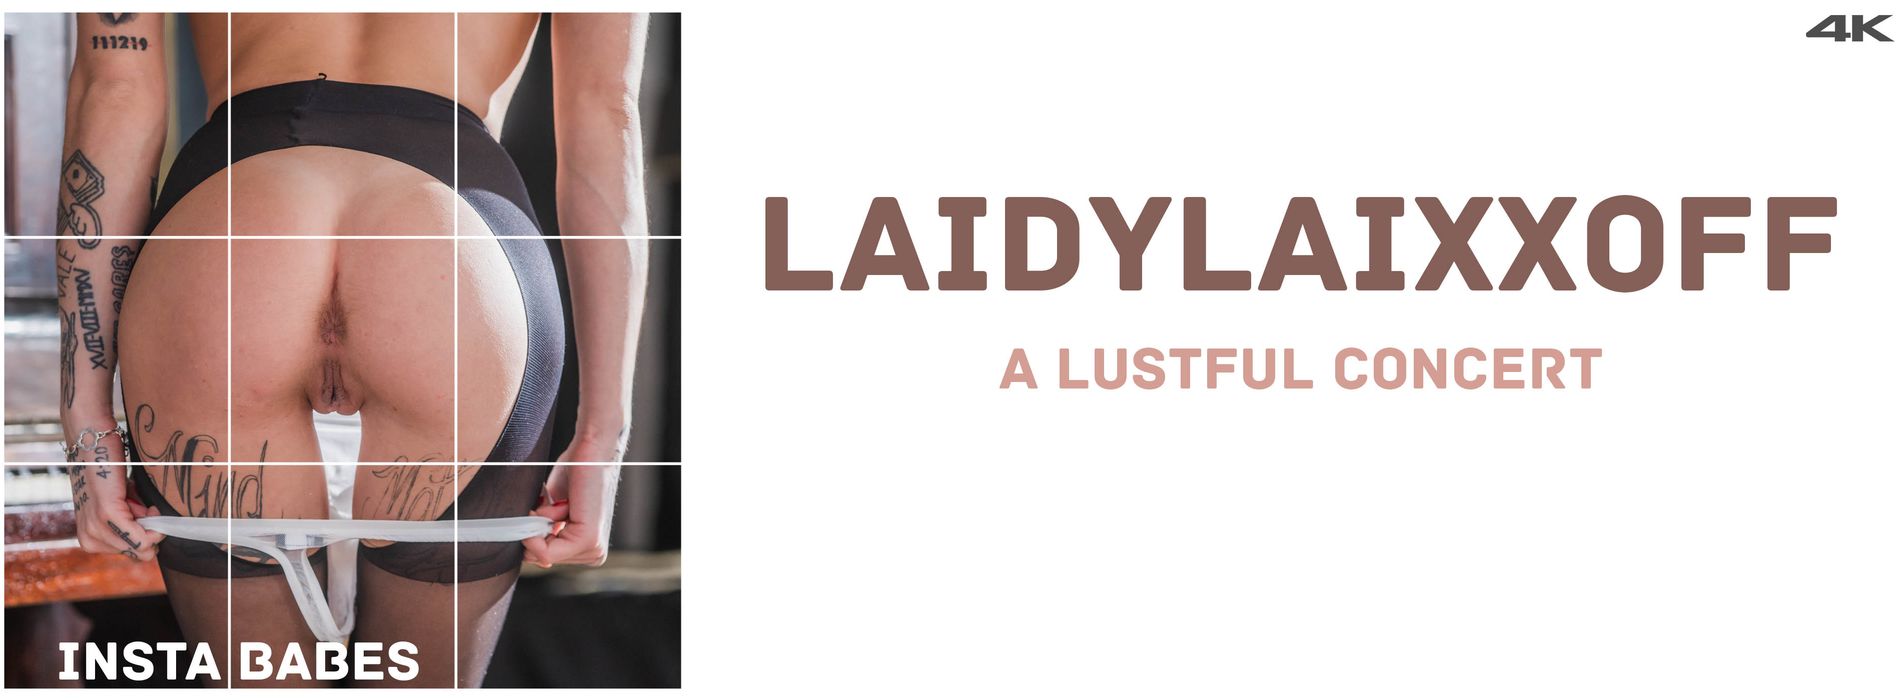 Laidylaixxoff “A Lustful Concert InstaBabes” Fitting-Room